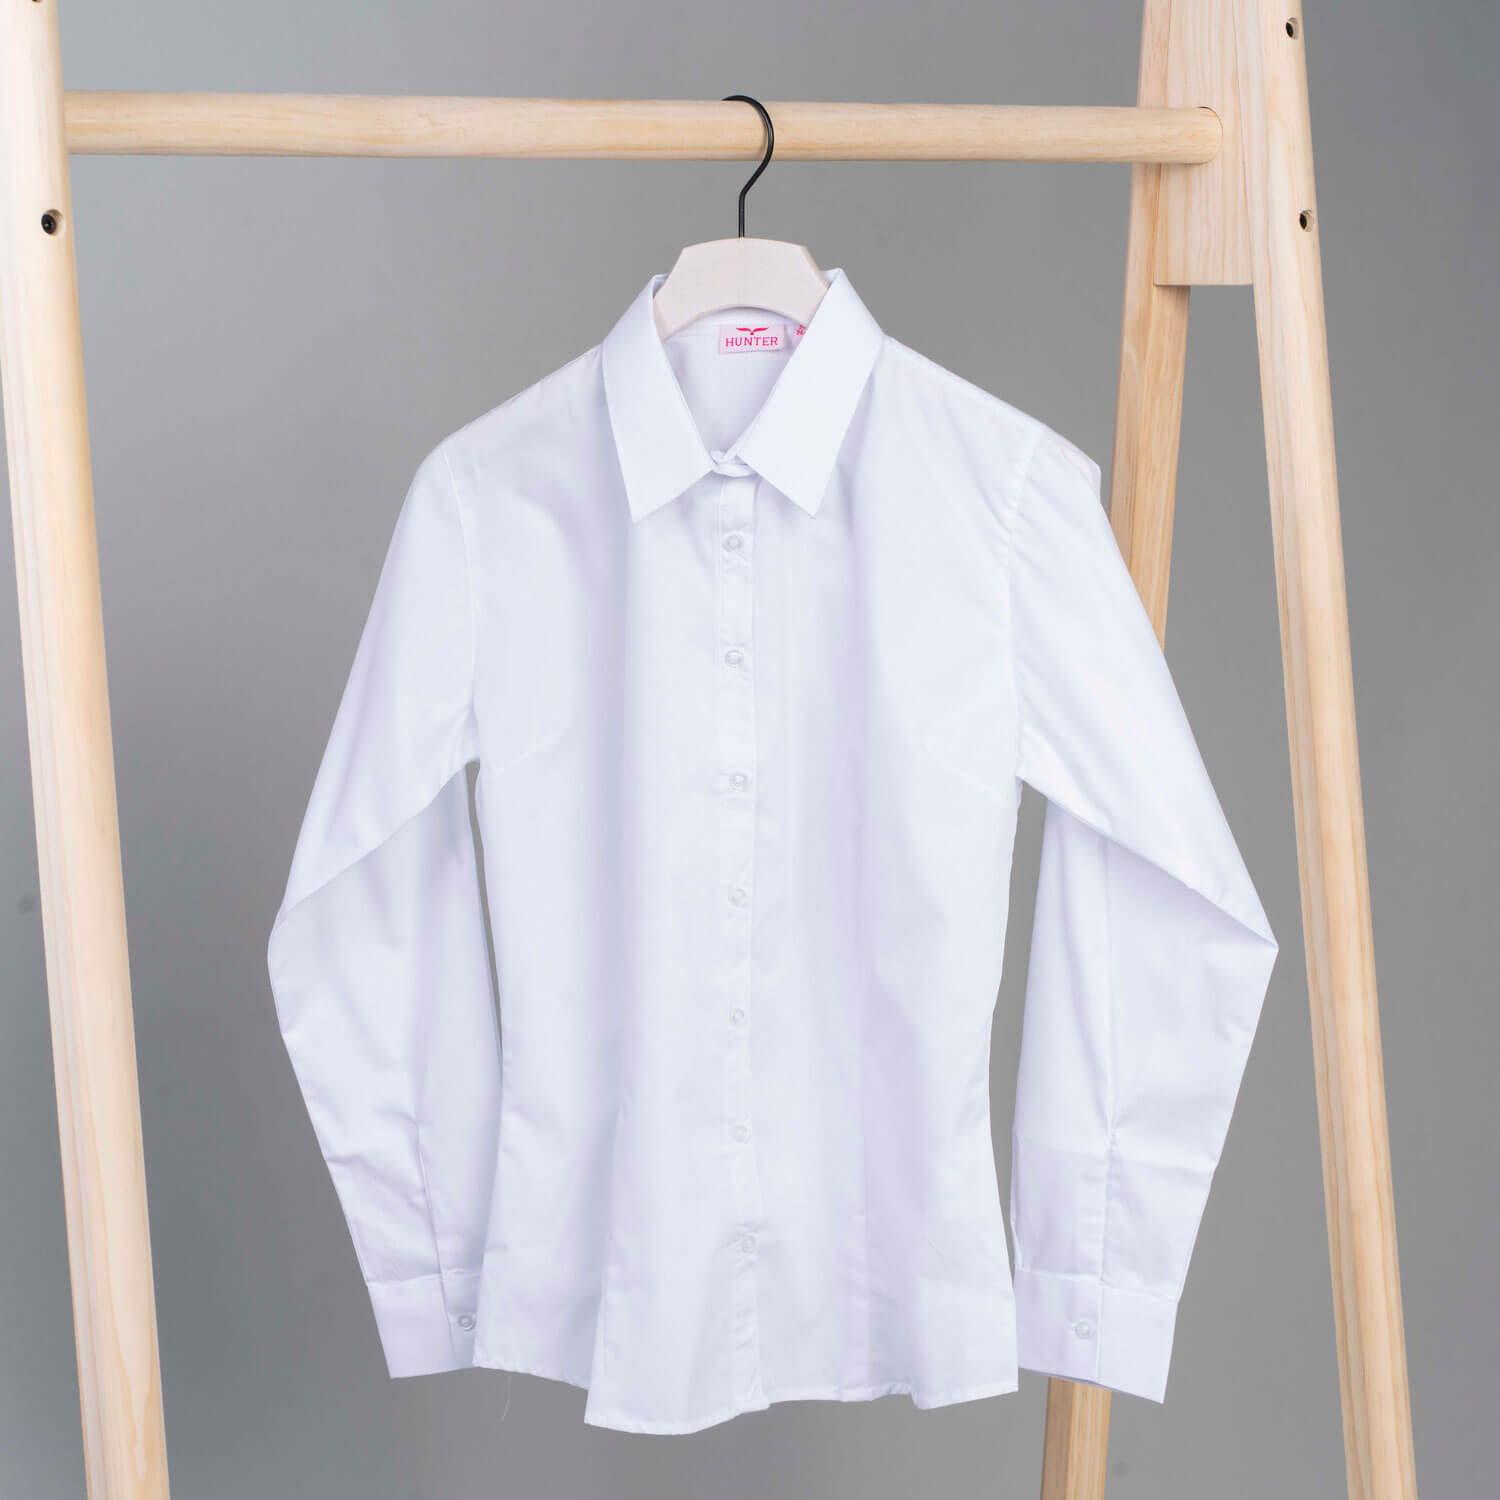 Hunter Girls Fitted Blouse - White 1 Shaws Department Stores